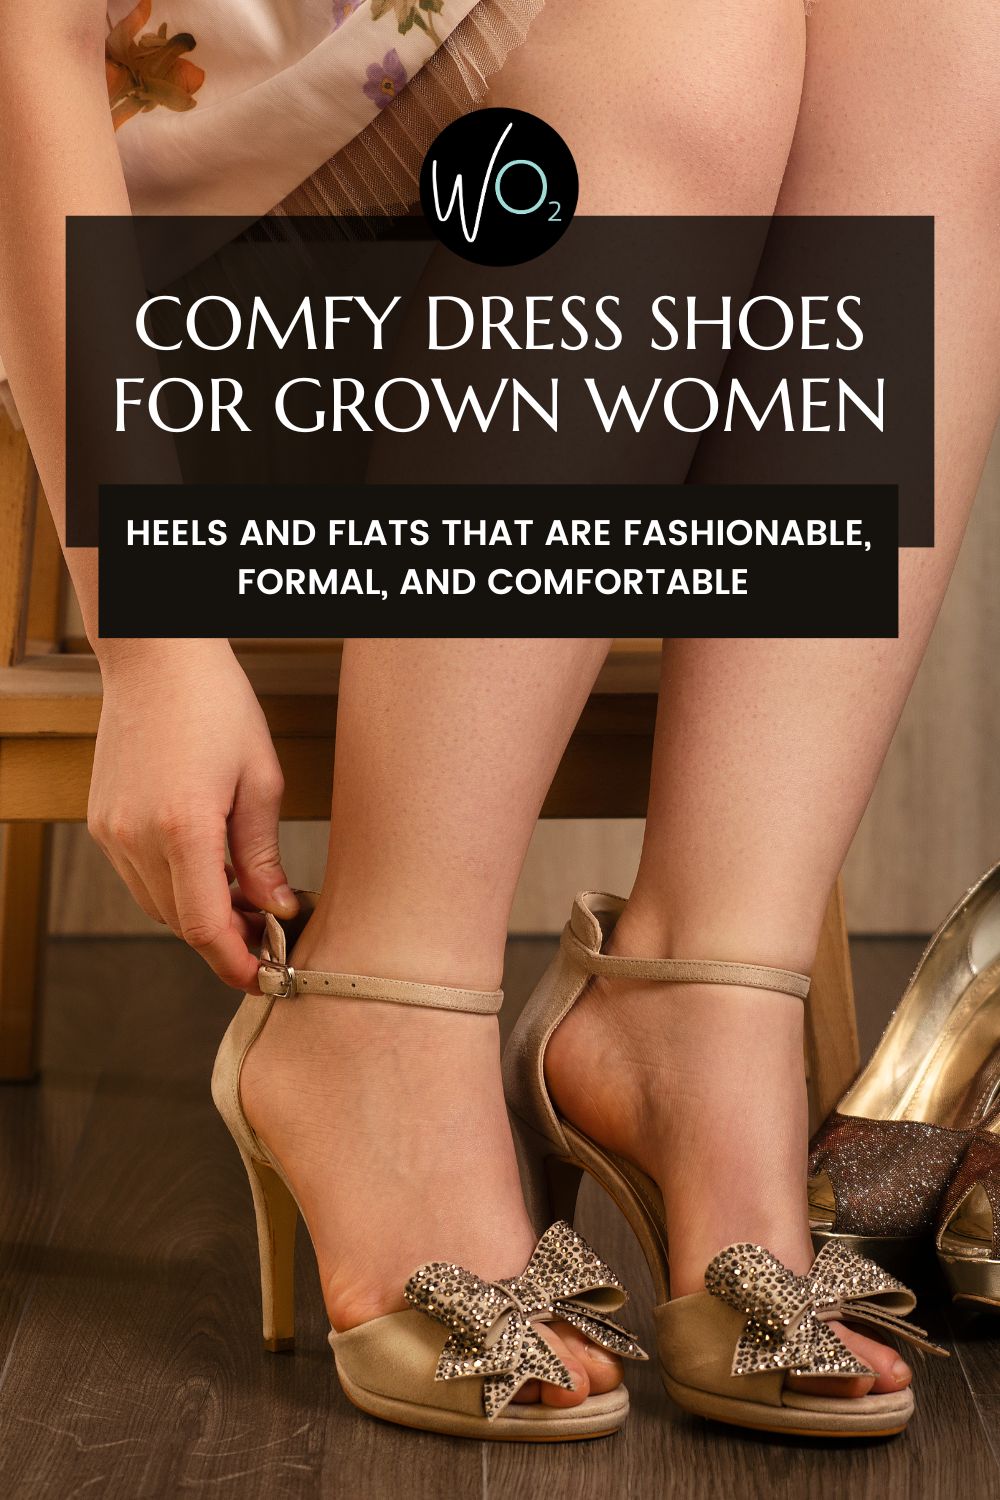 Formal Shoes For Women|women's Beige Heeled Pumps - Comfortable Square Heel  Dress Shoes